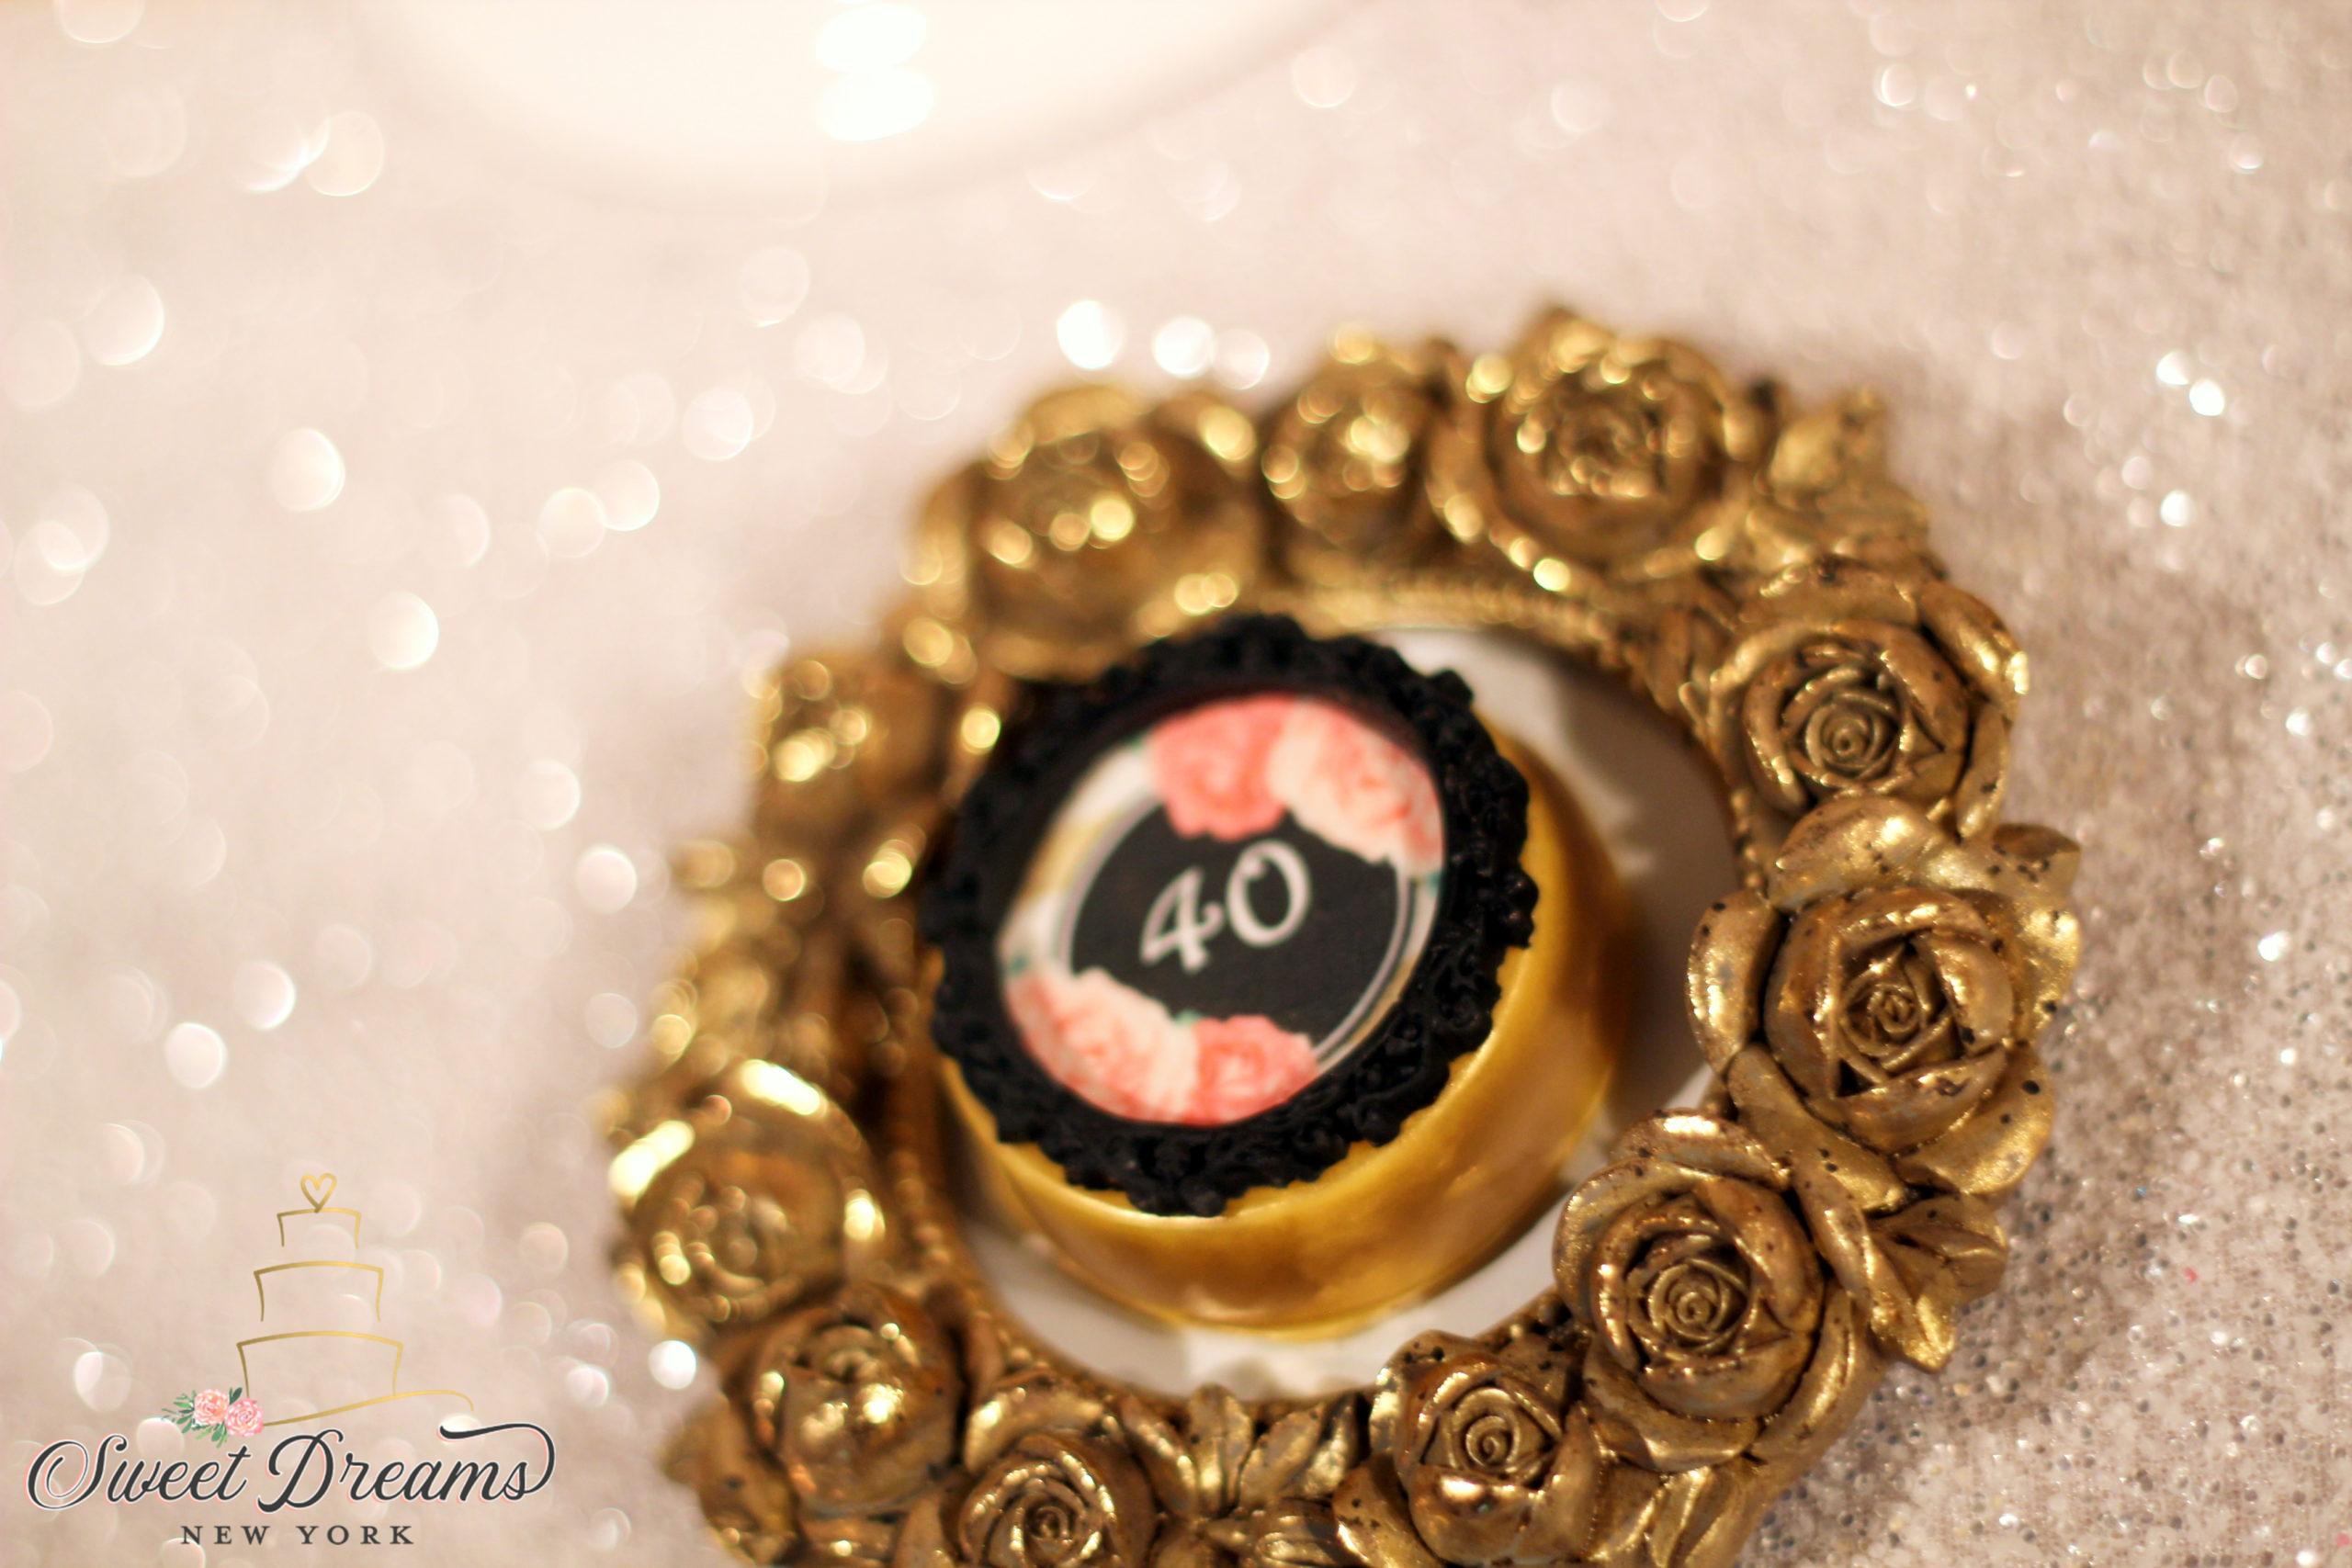 Custom desserts 40th birthday dessert table ideas gold and black NYC Long Island by Sweet dreams NY